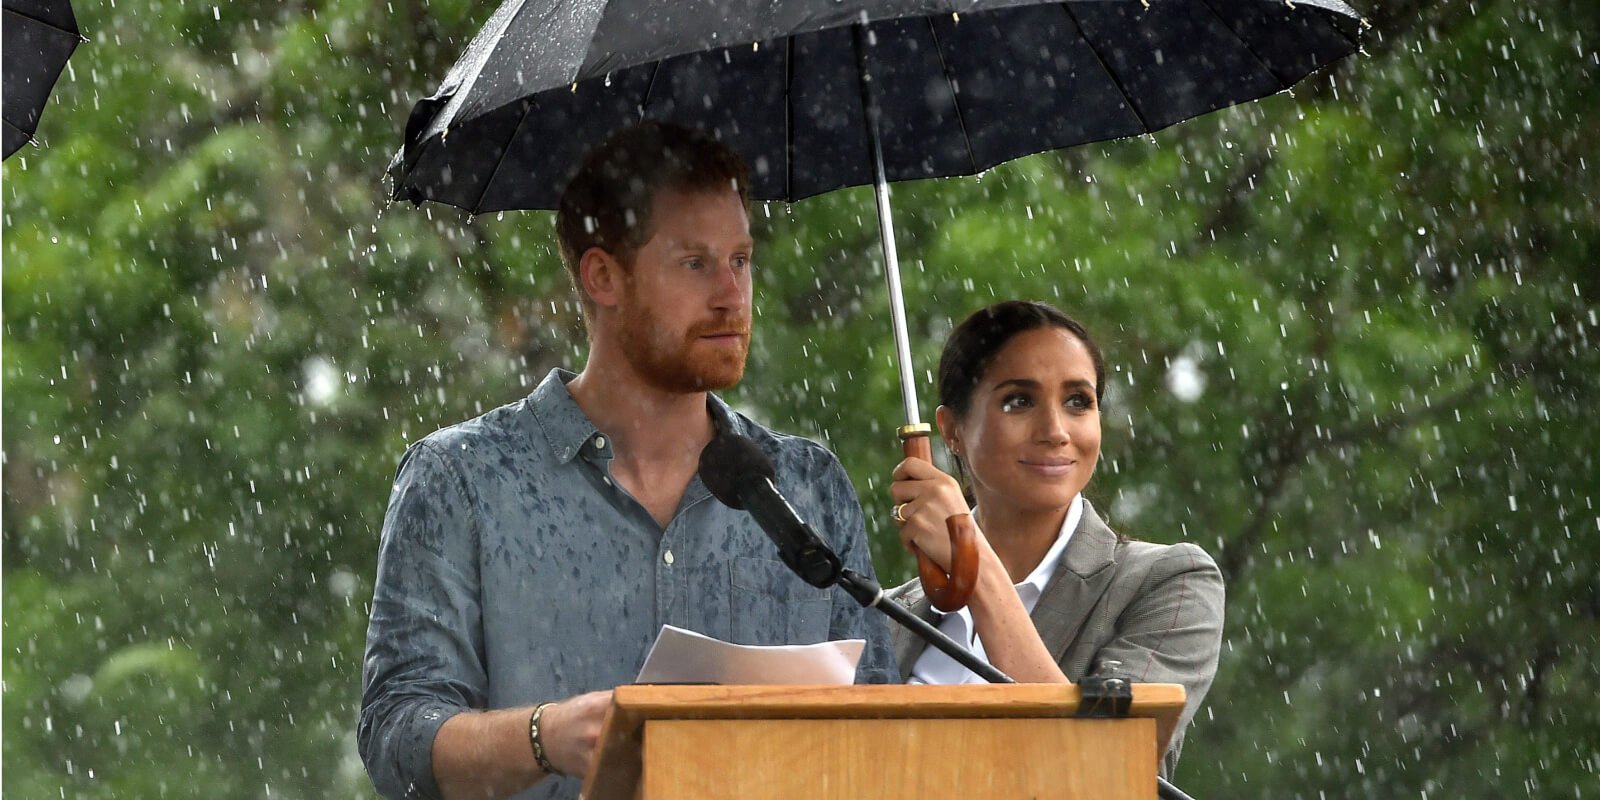 Prince Harry and Meghan Markle stand under an umbrella in 2018 in Australia.